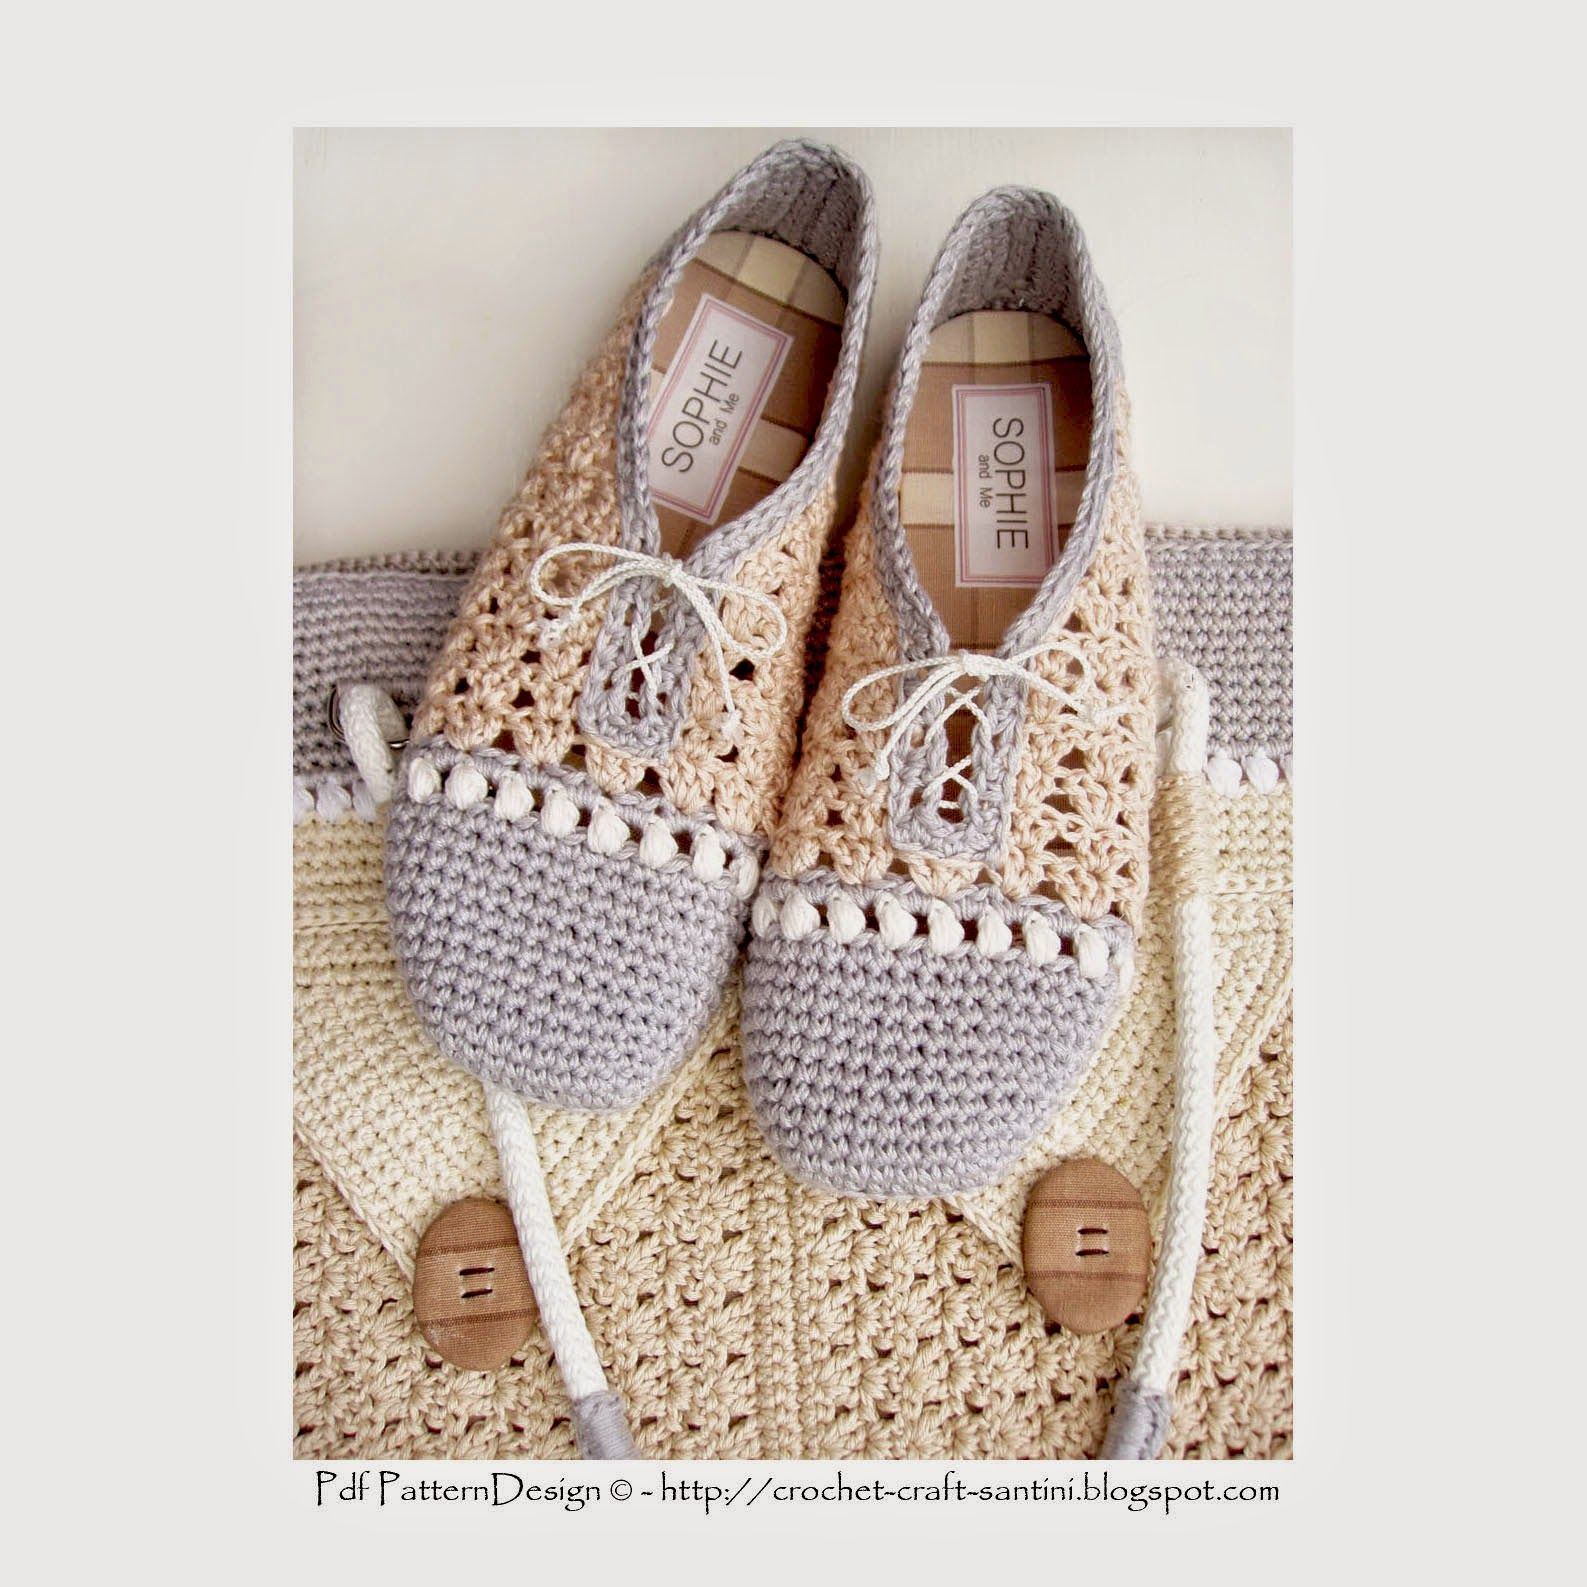 CROCHET SLIPPER/SHOES WITH MATCHING SHOPPING BAG! NEW PATTERN!